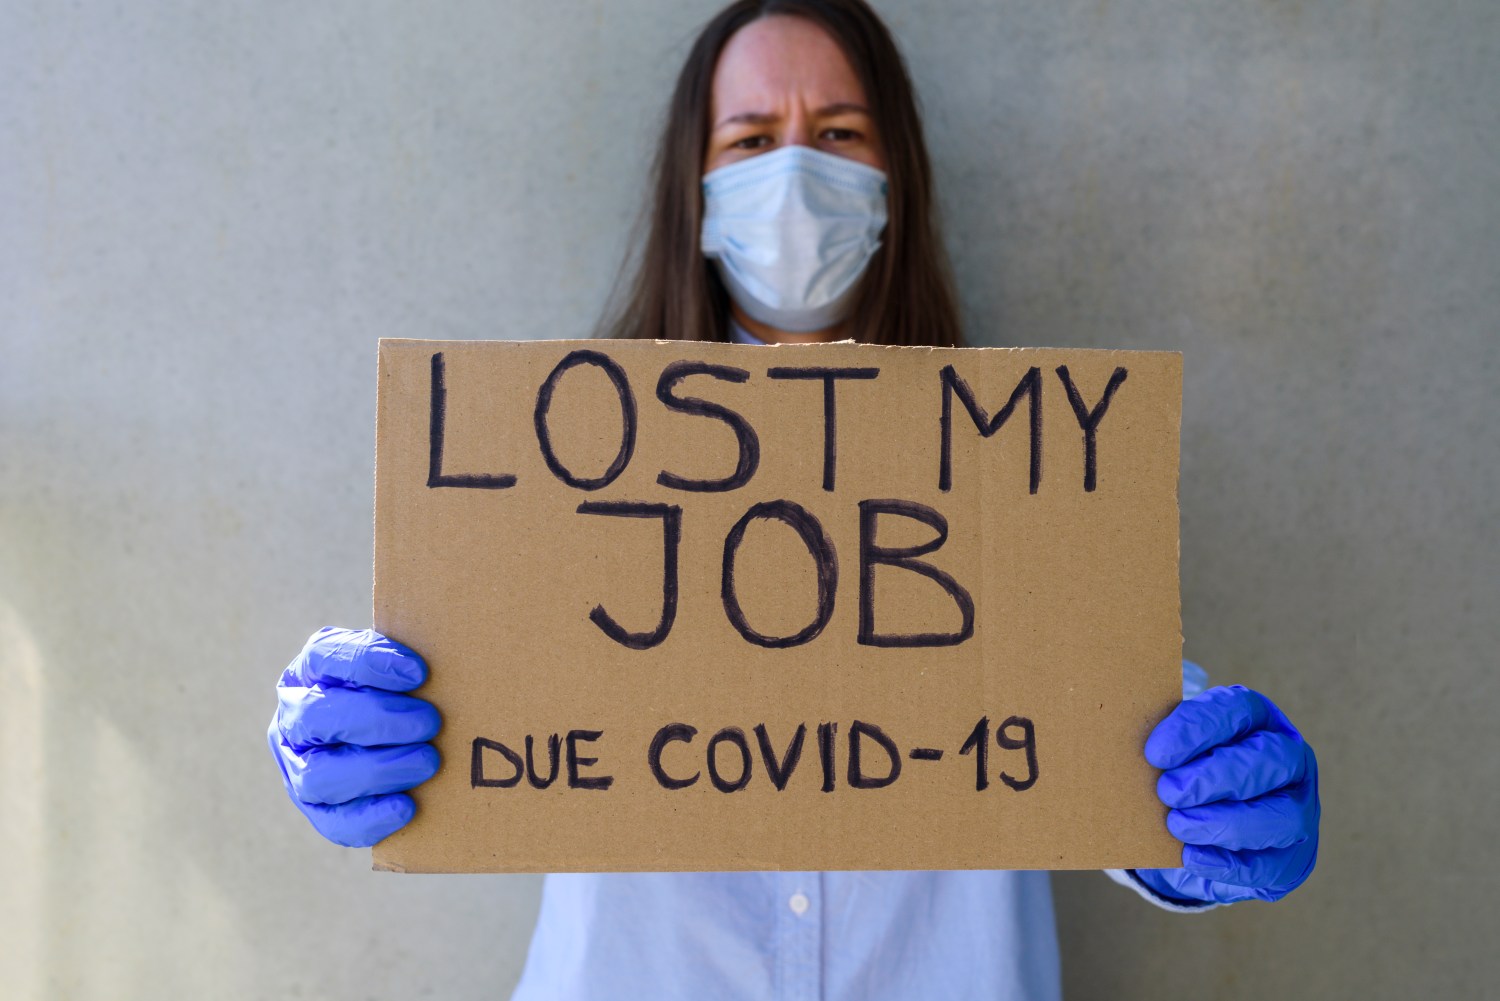 Woman office worker in blue shirt with cardboard sign LOST JOB. Jobless, unemployment due covid-19 concept.